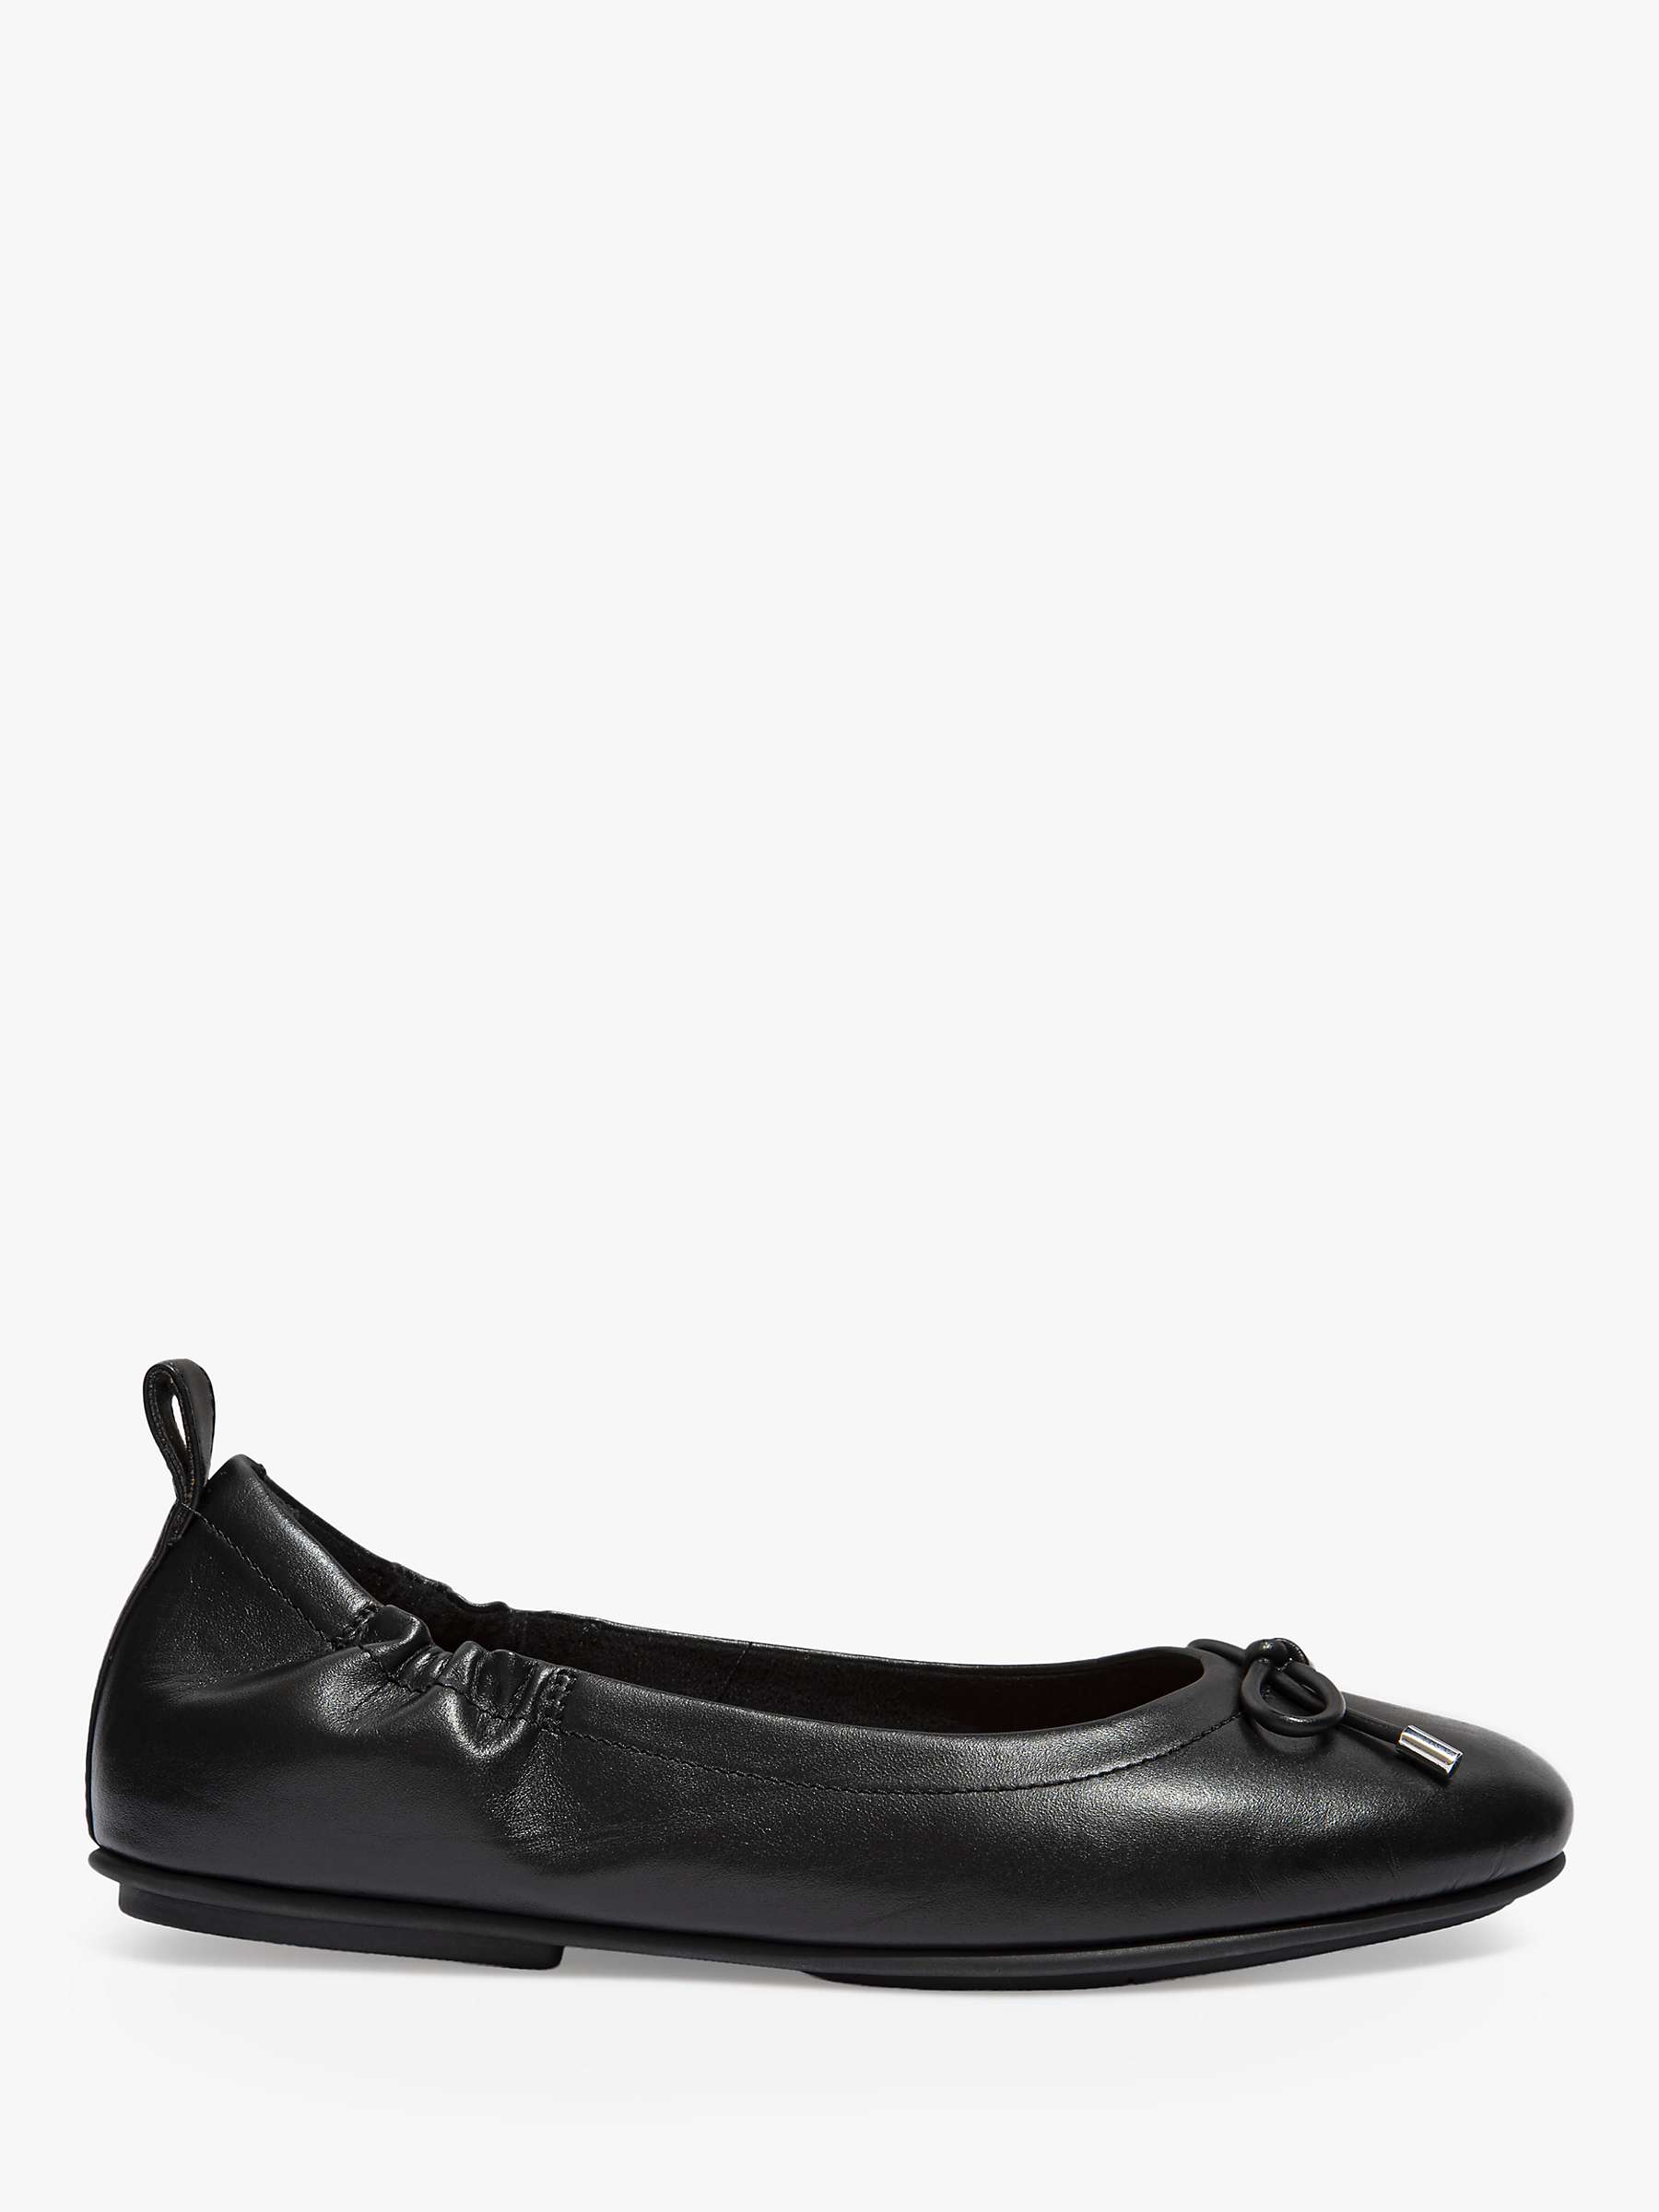 FitFlop Allegro Bow Leather Pumps, Black at John Lewis & Partners